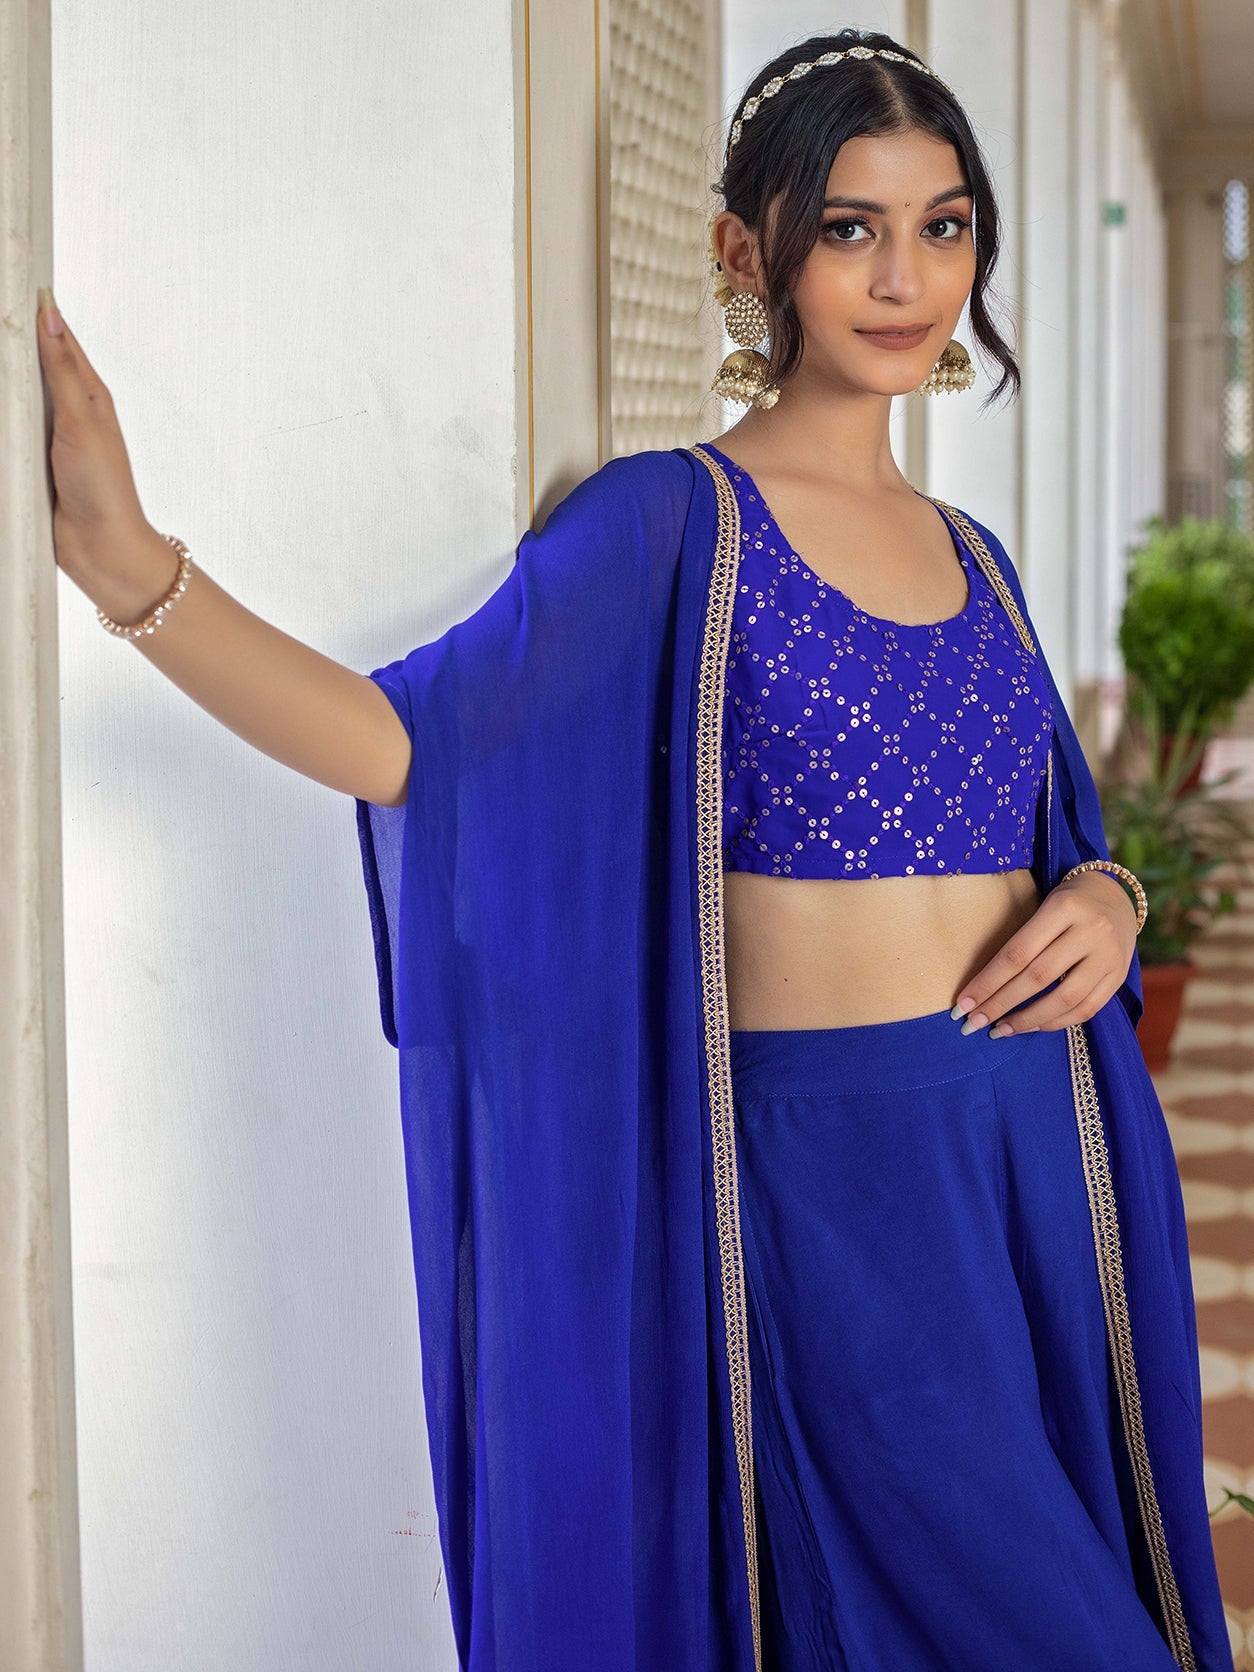 make-a-statement-in-our-blue-co-ord-set-featuring-a-sequin-embroidered-jaal-on-the-crop-top-effortless-elegance-with-a-touch-of-sparkle